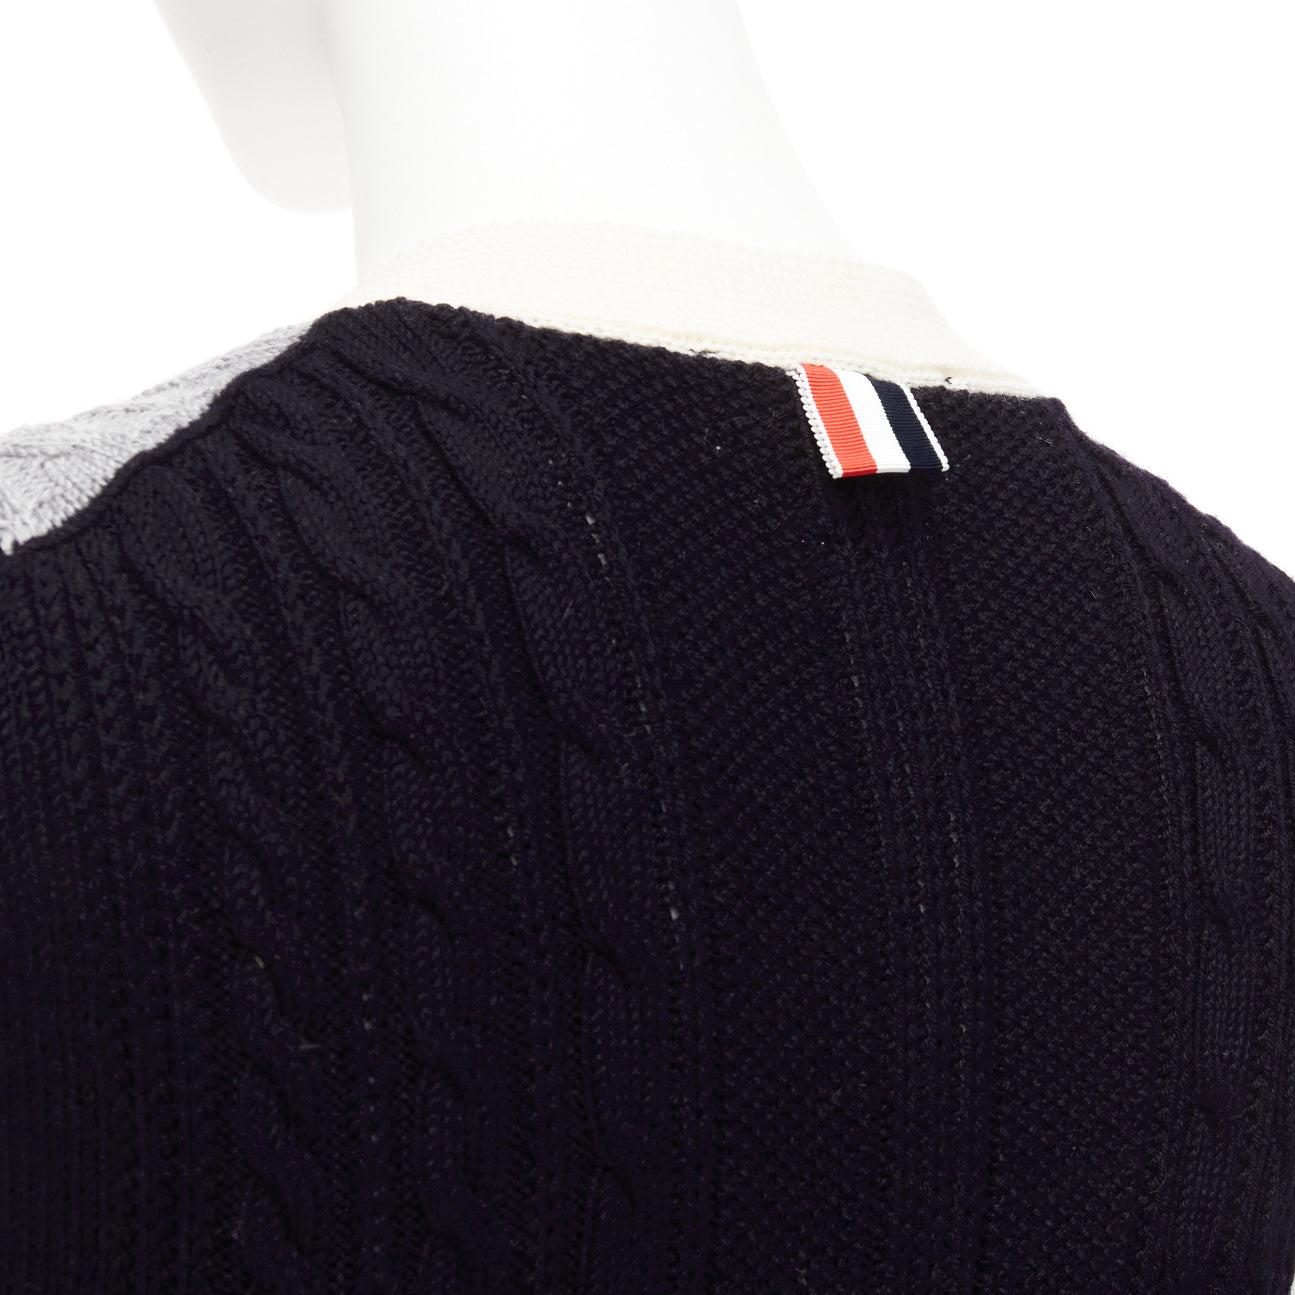 THOM BROWNE fun mix irish cable merino wool elongated vest IT40 S
Reference: DYTG/A00052
Brand: Thom Browne
Designer: Thom Browne
Material: Wool, Cotton
Color: Black, Grey
Pattern: Striped
Closure: Button
Extra Details: TB stripes at button